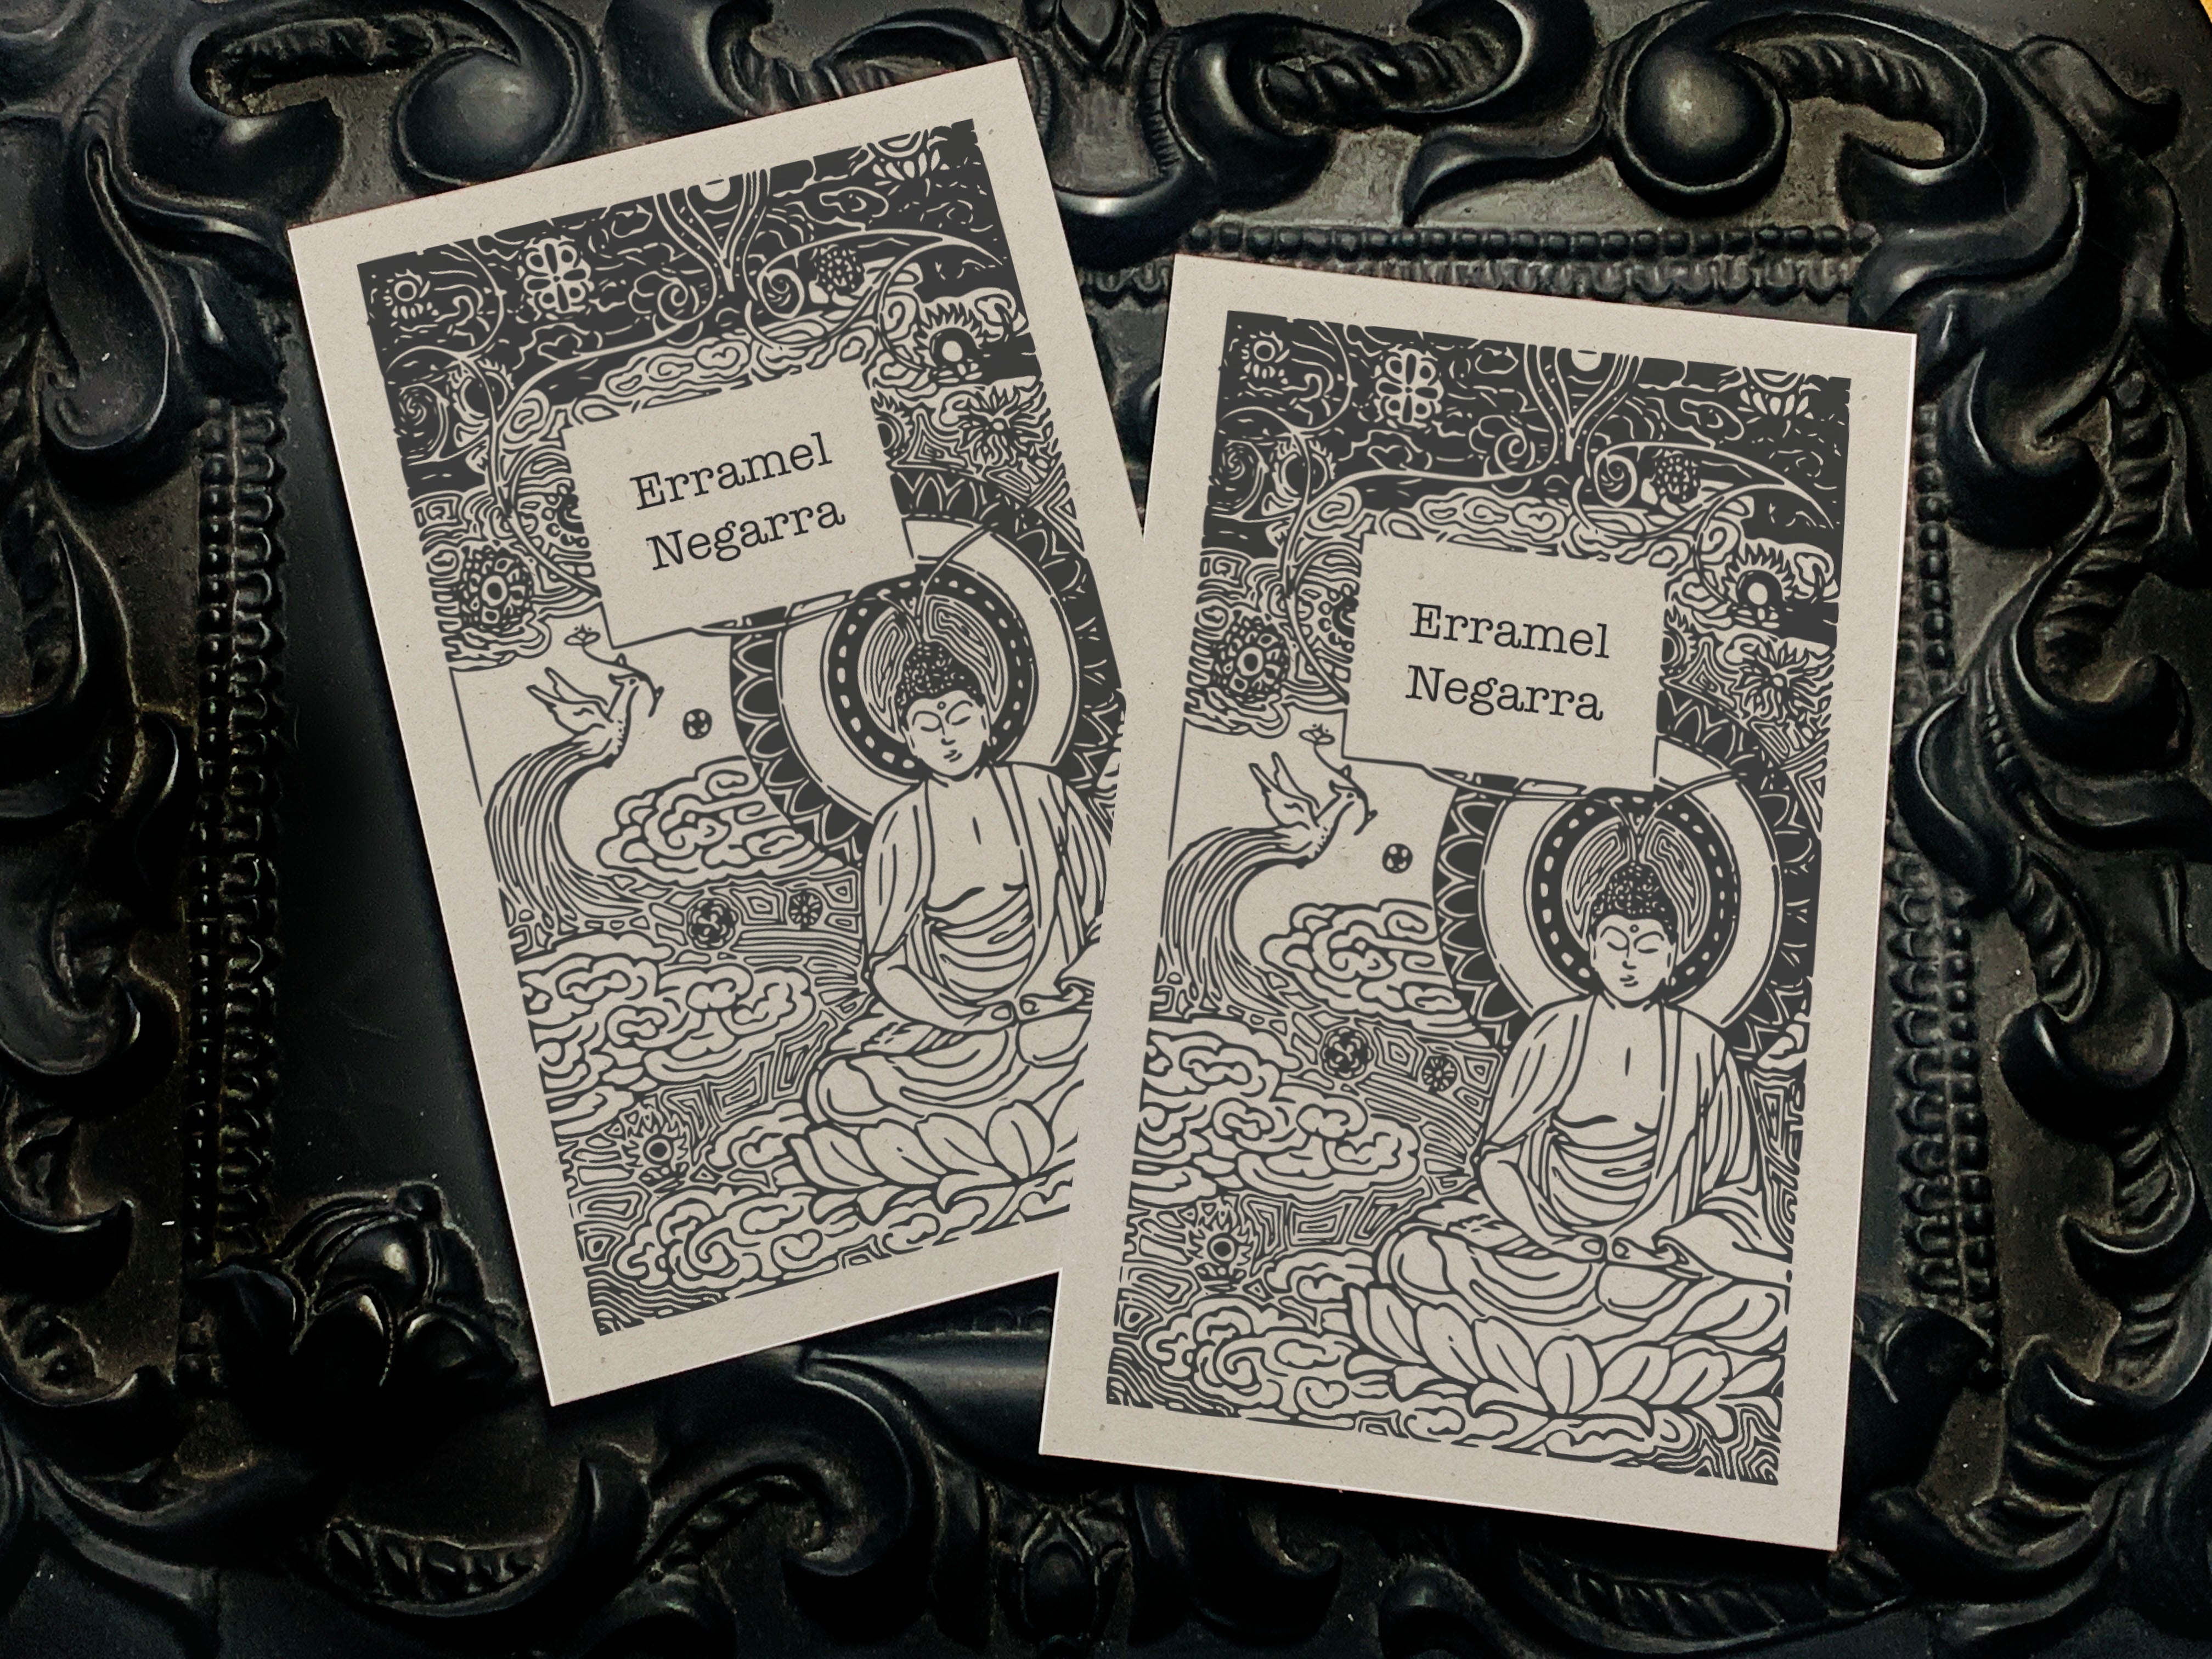 Buddha Woodcut, Personalized Ex-Libris Bookplates, Crafted on Traditional Gummed Paper, 2.5in x 4in, Set of 30